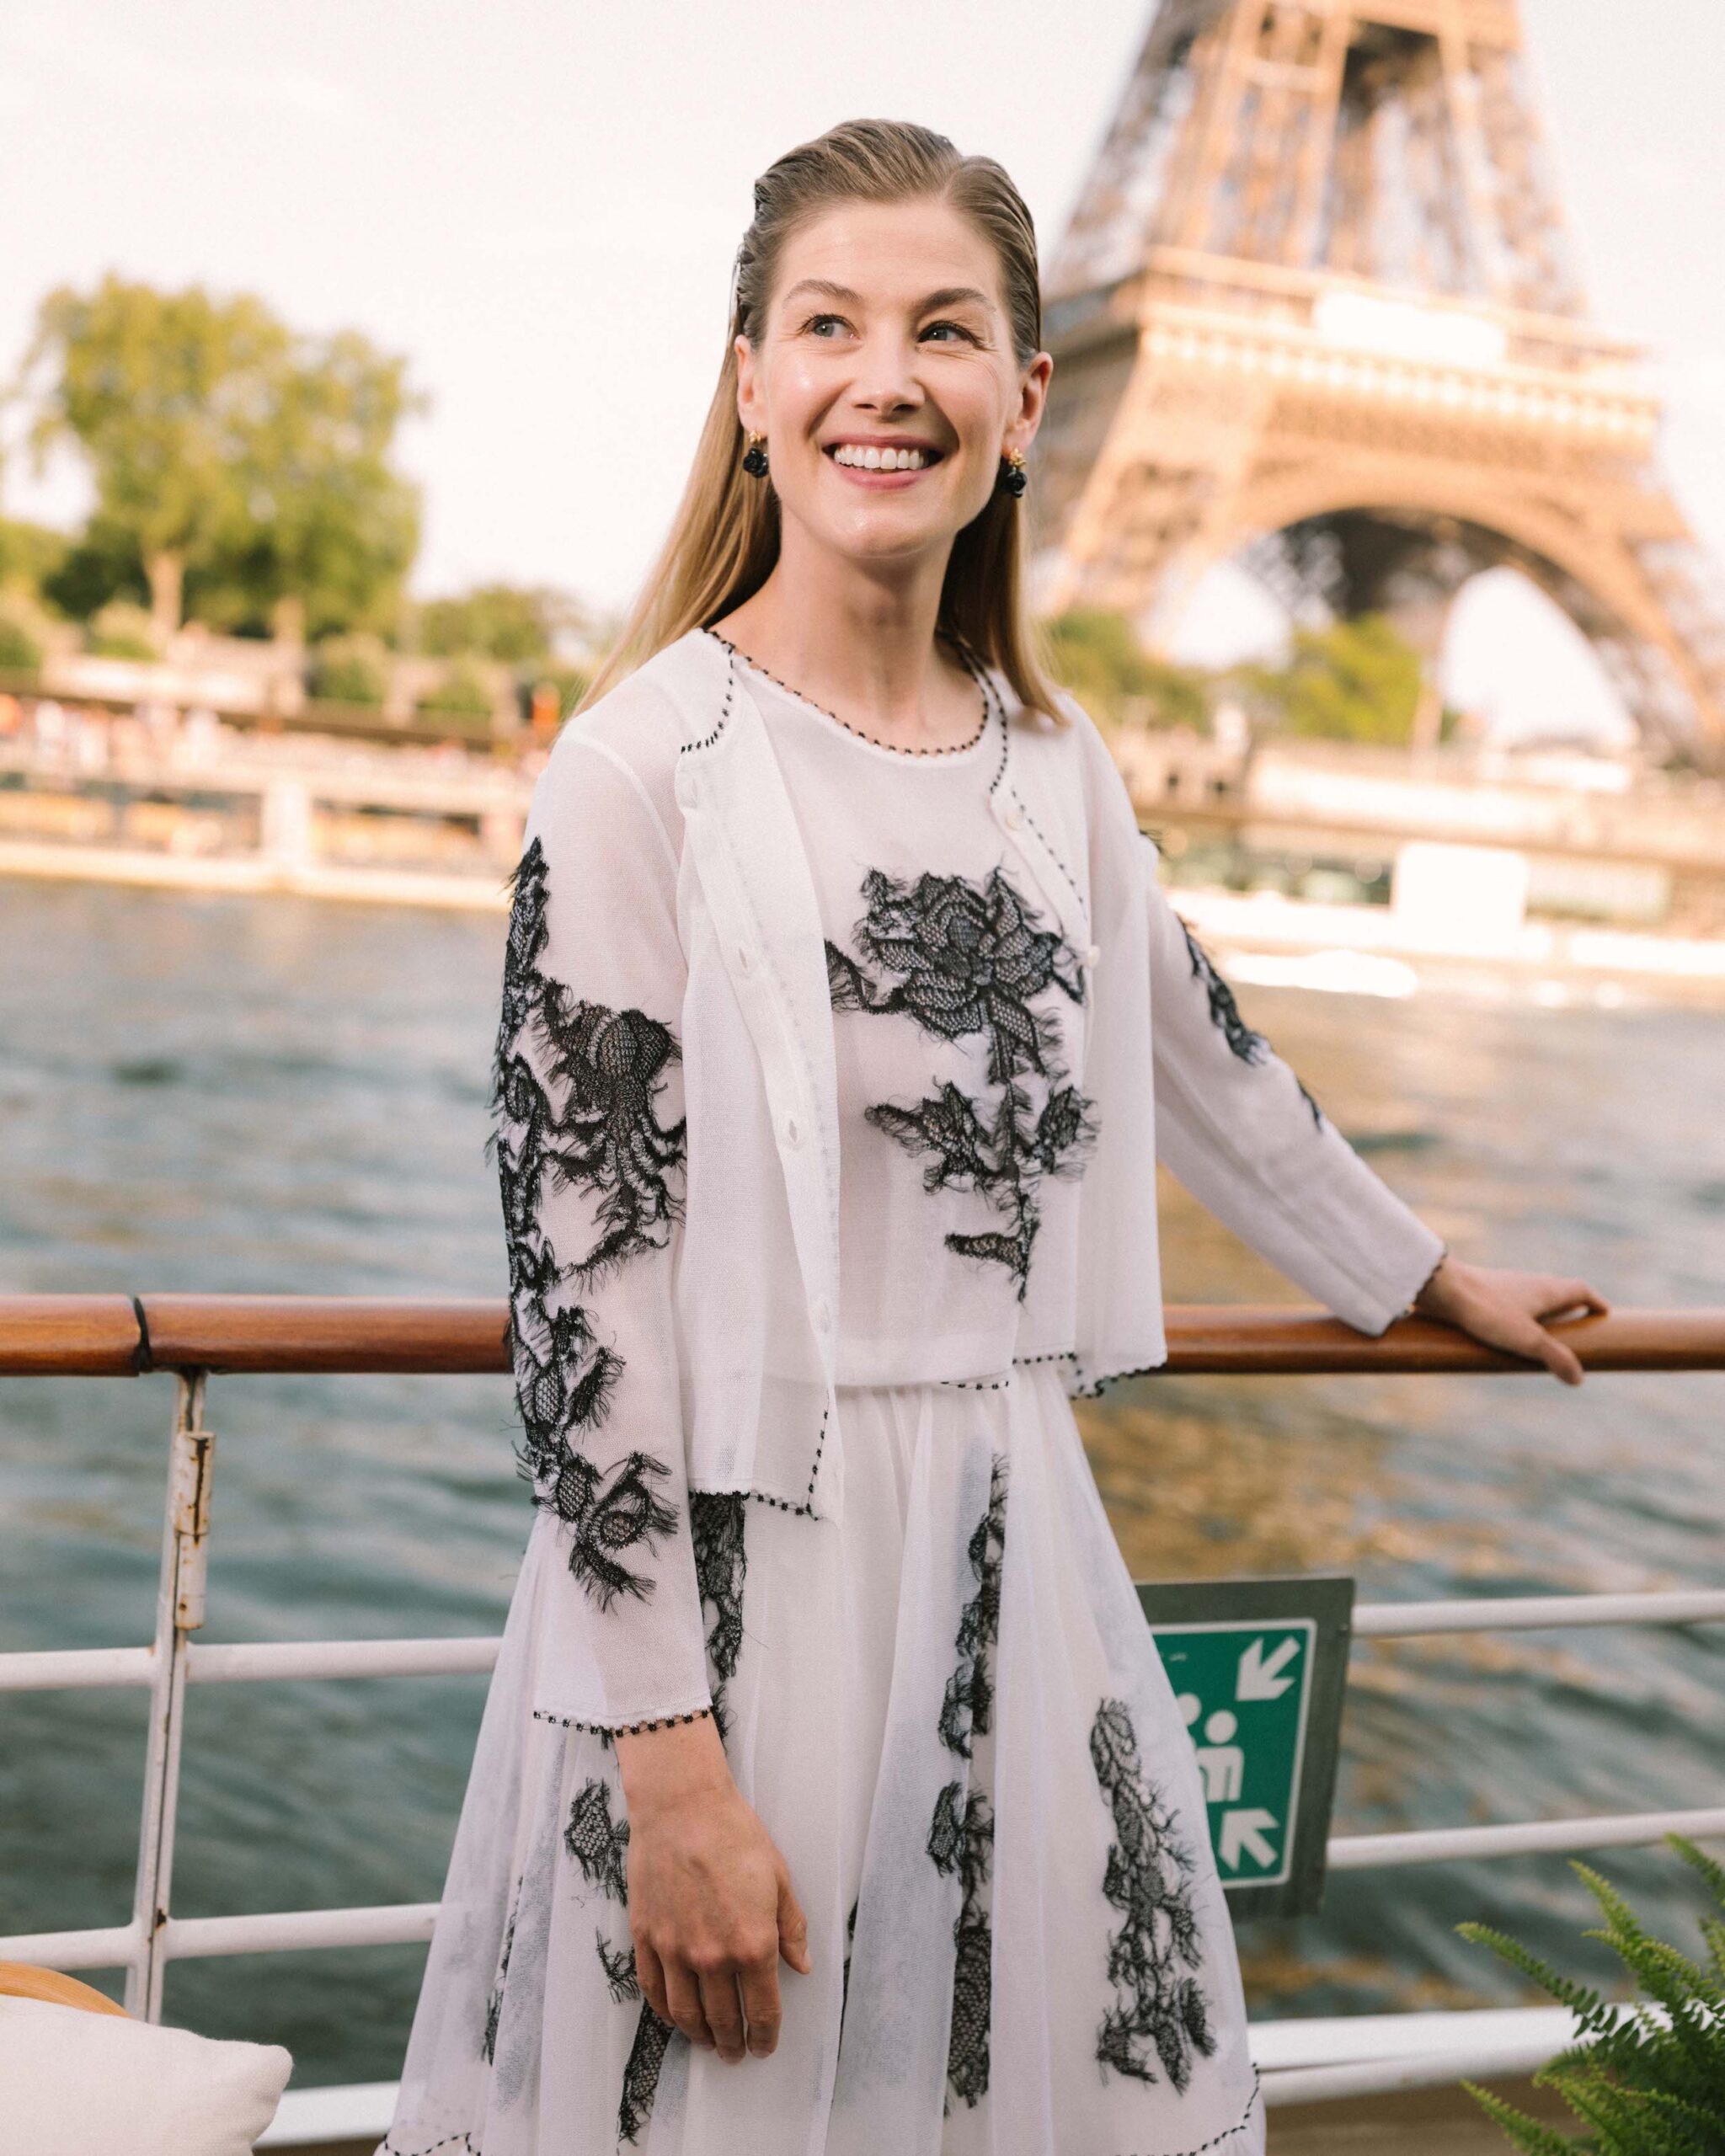 Rosamund Pike in Dior Cruise 2023 Rosamund Pike exuded ethereal charm in a white embroidered silk cardigan, top, and skirt from the Dior Cruise 2023 collection.